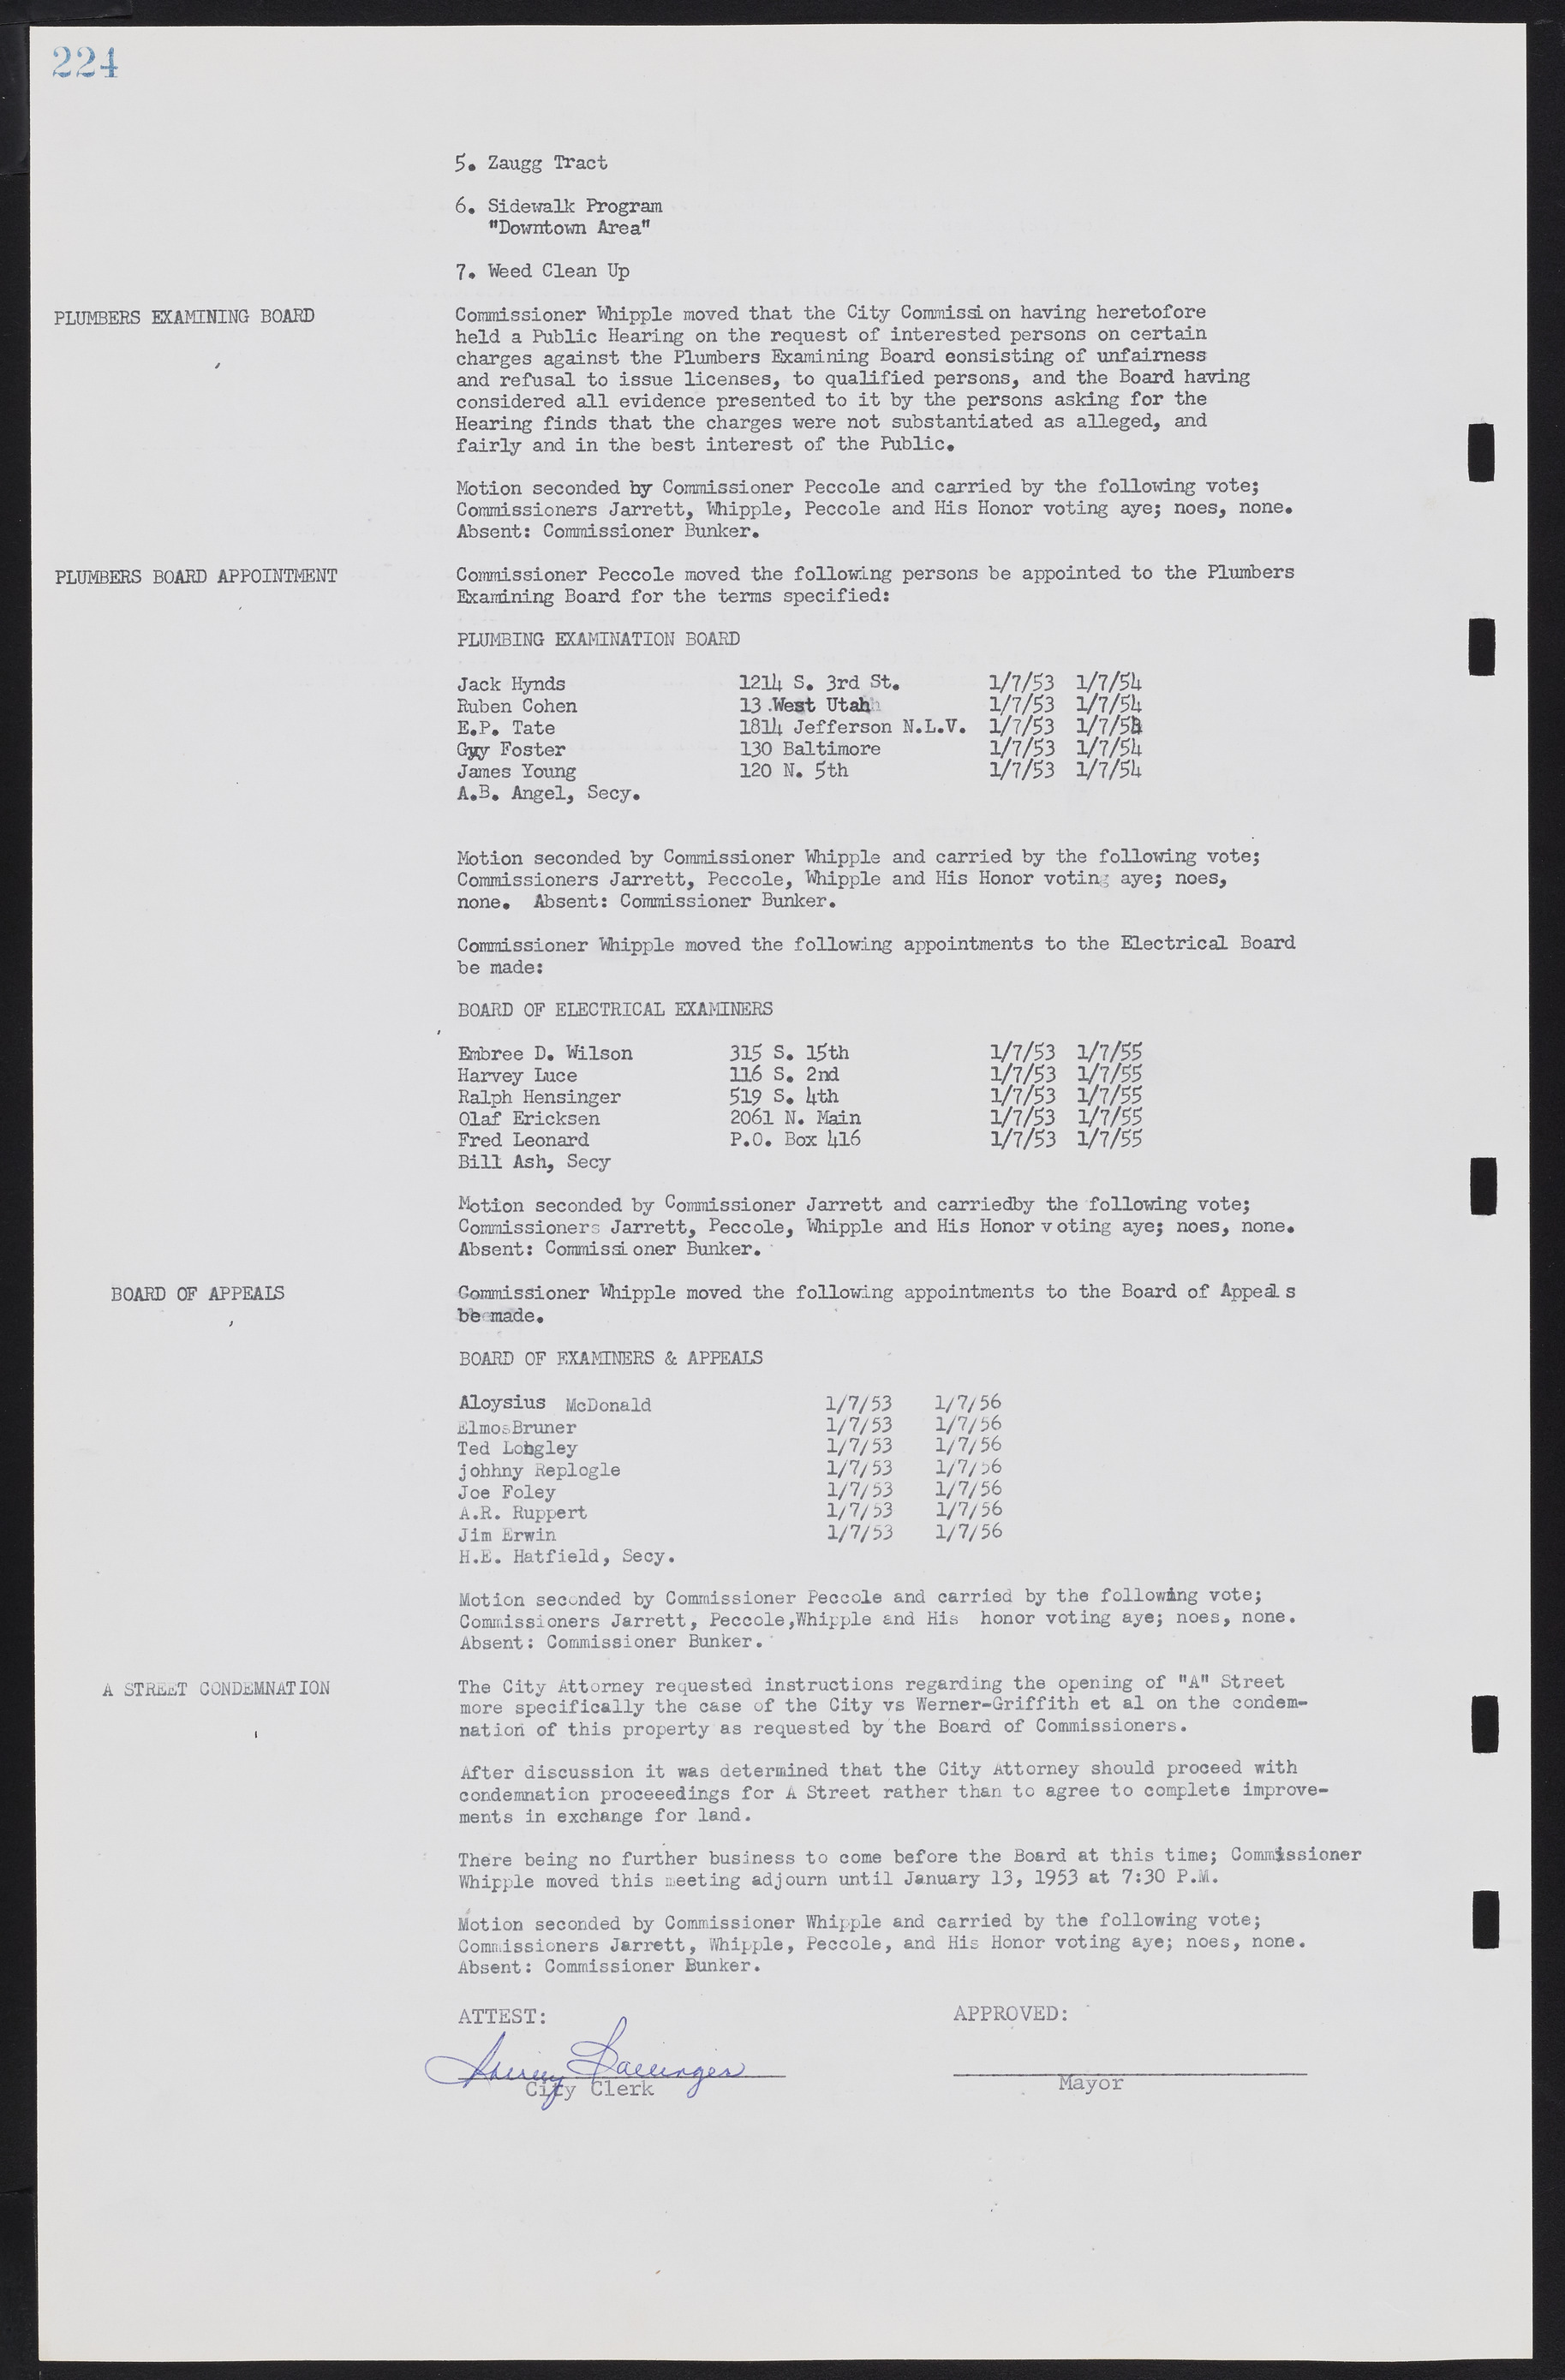 Las Vegas City Commission Minutes, May 26, 1952 to February 17, 1954, lvc000008-240